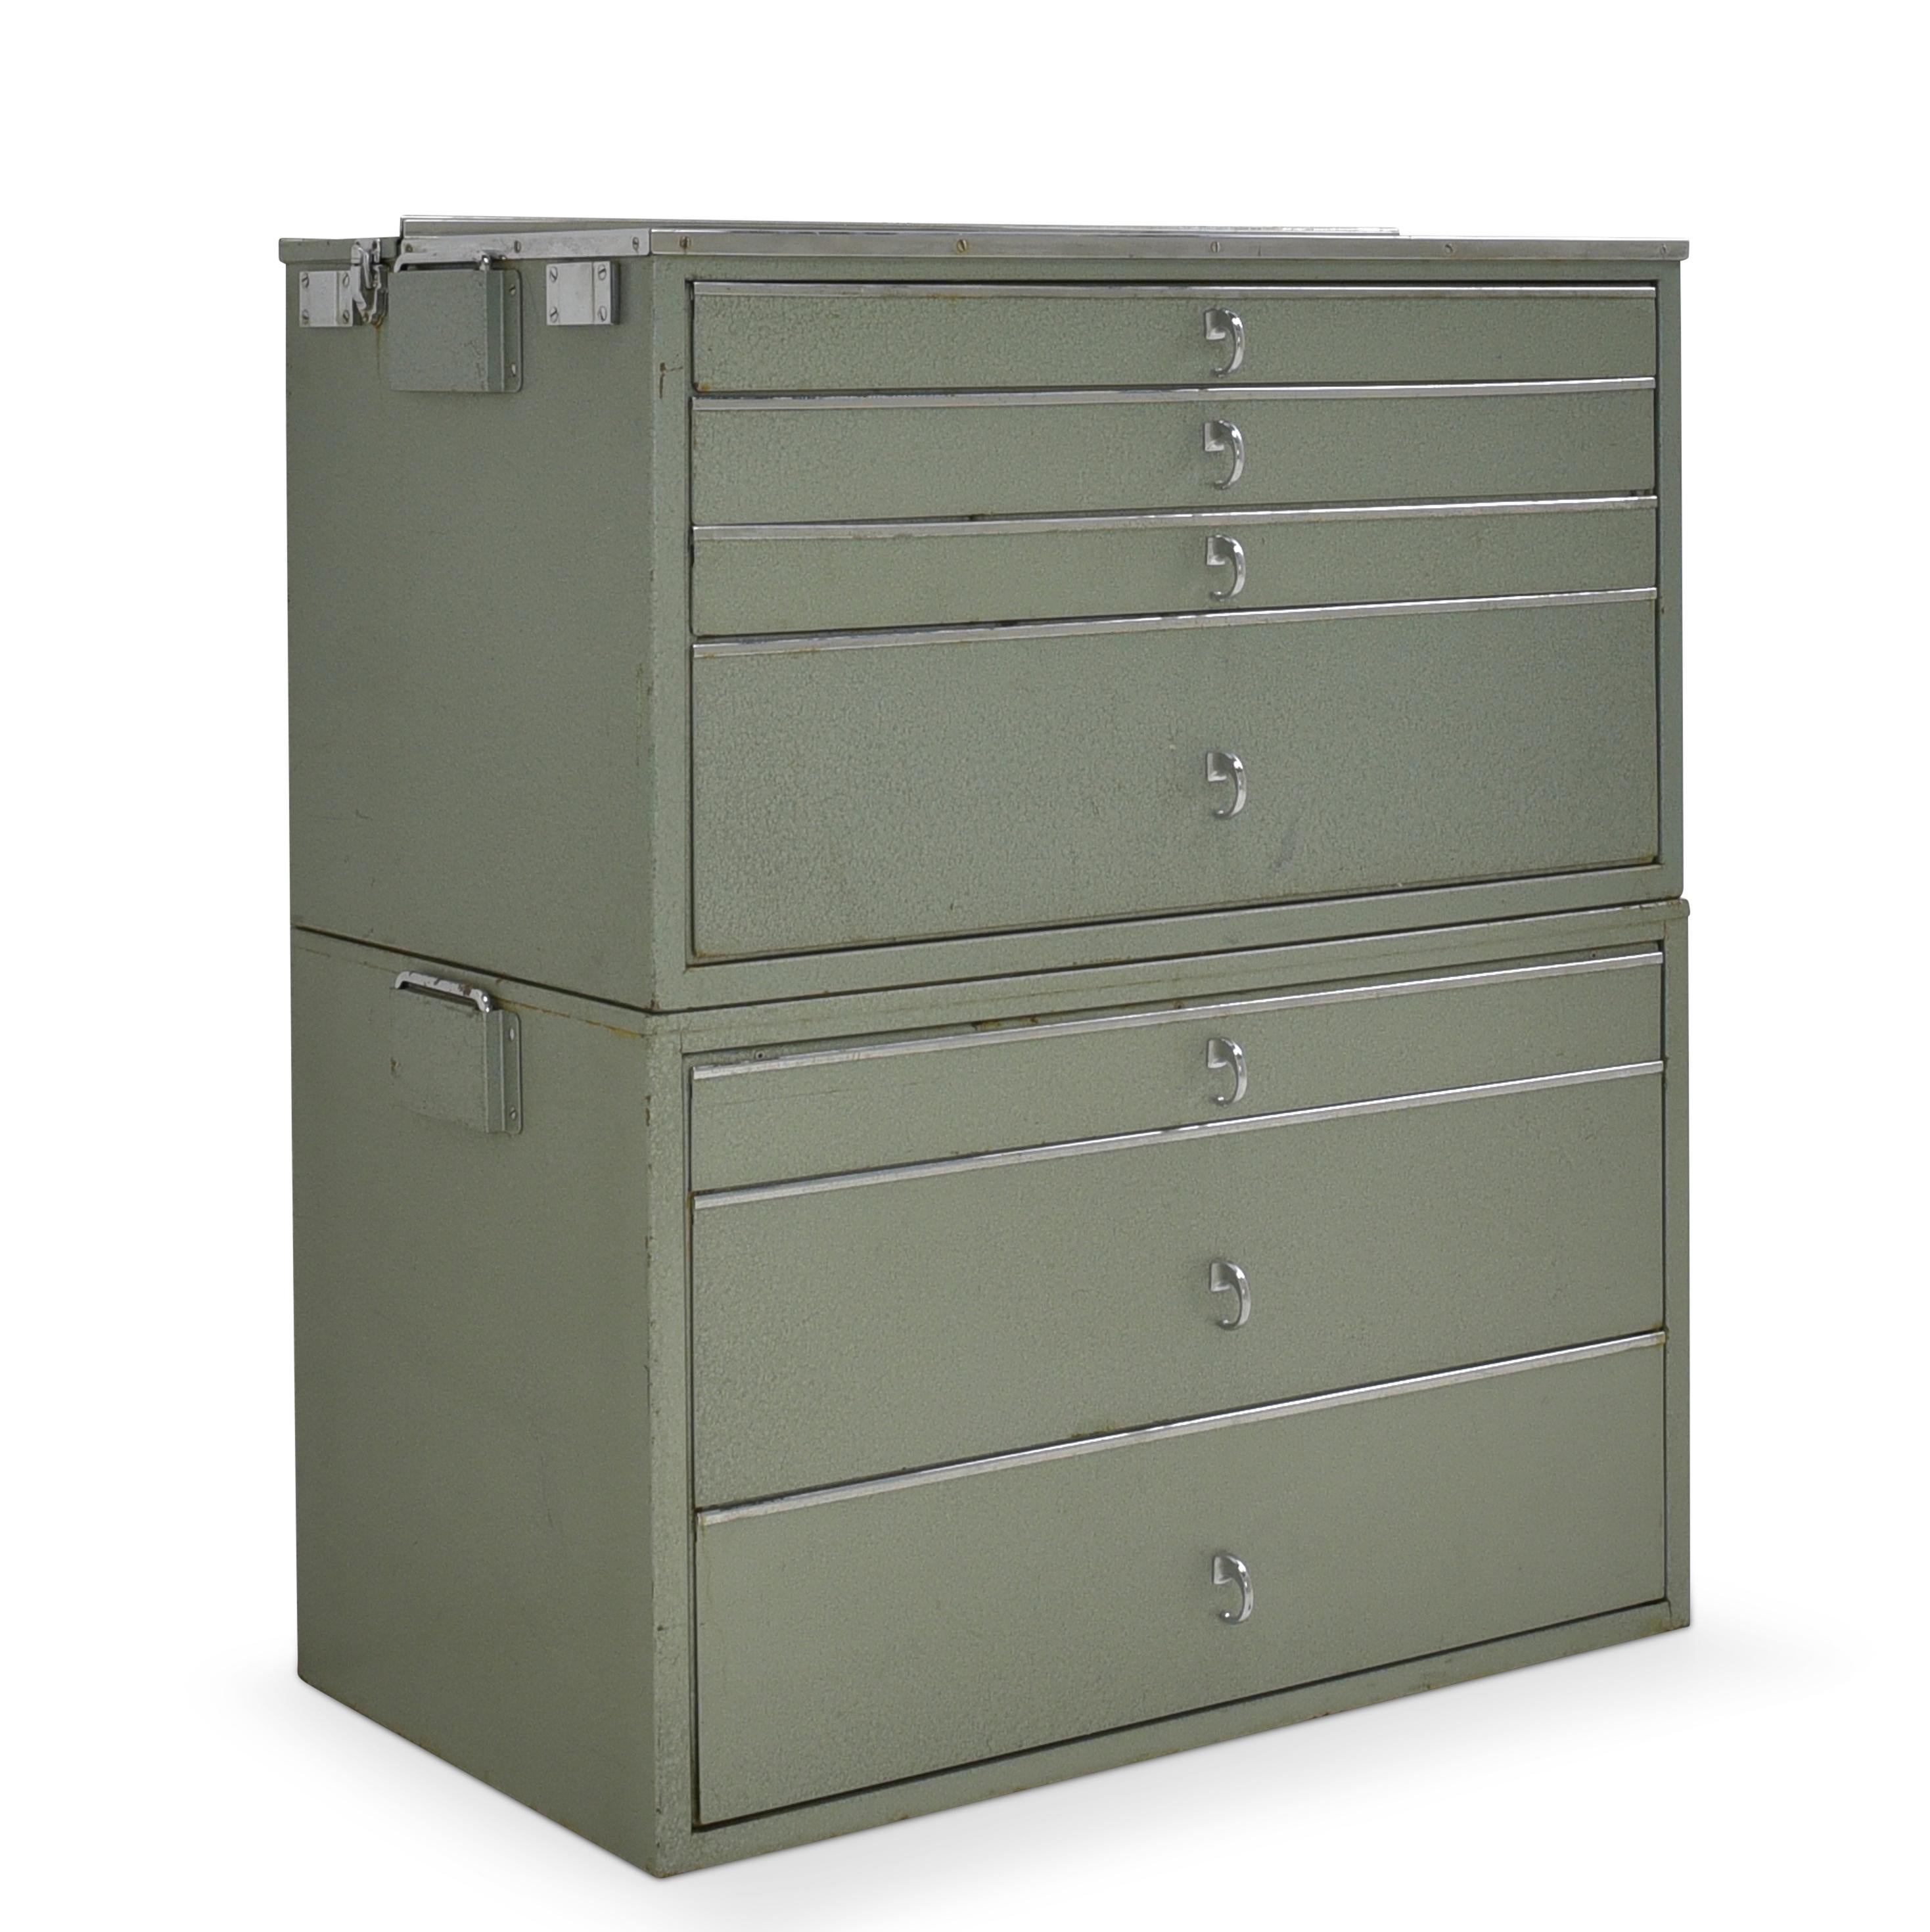 Portable Bundeswehr doctor's cabinet 2-part metal cabinet dentist's cabinet around 1970

Features:
Upper box partially hinged, partially with work surface
Both boxes with side handles
Grey-green Hammer finish
Chromed bars and handles
Some